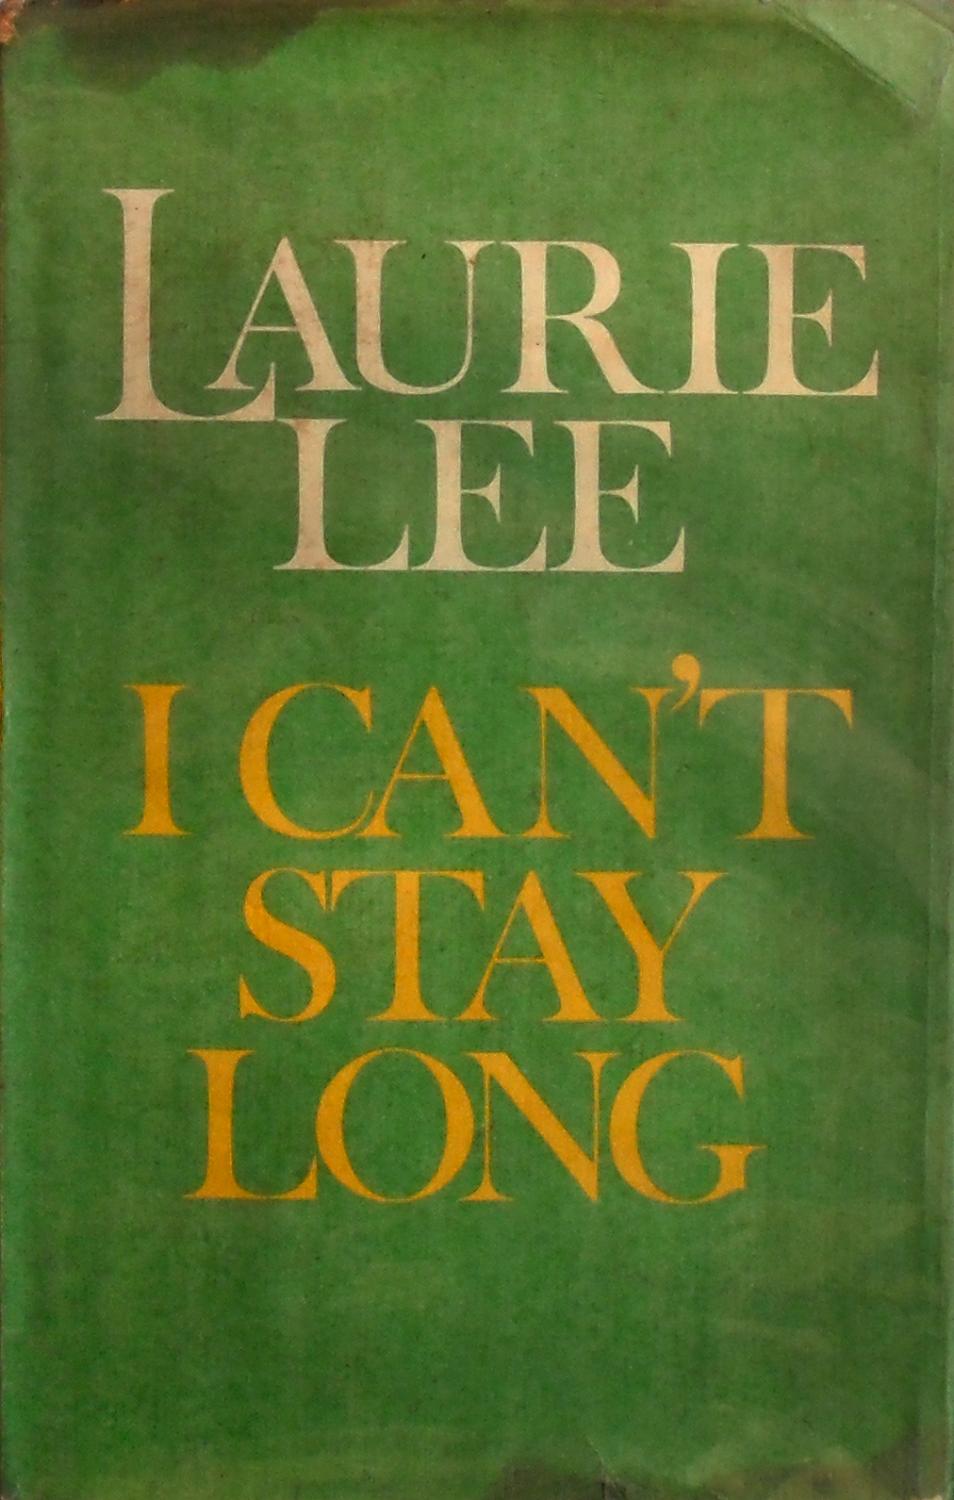 by LAURIE LEE 1975 1st Occasional Writing ' I CAN'T STAY LONG ' Edition 